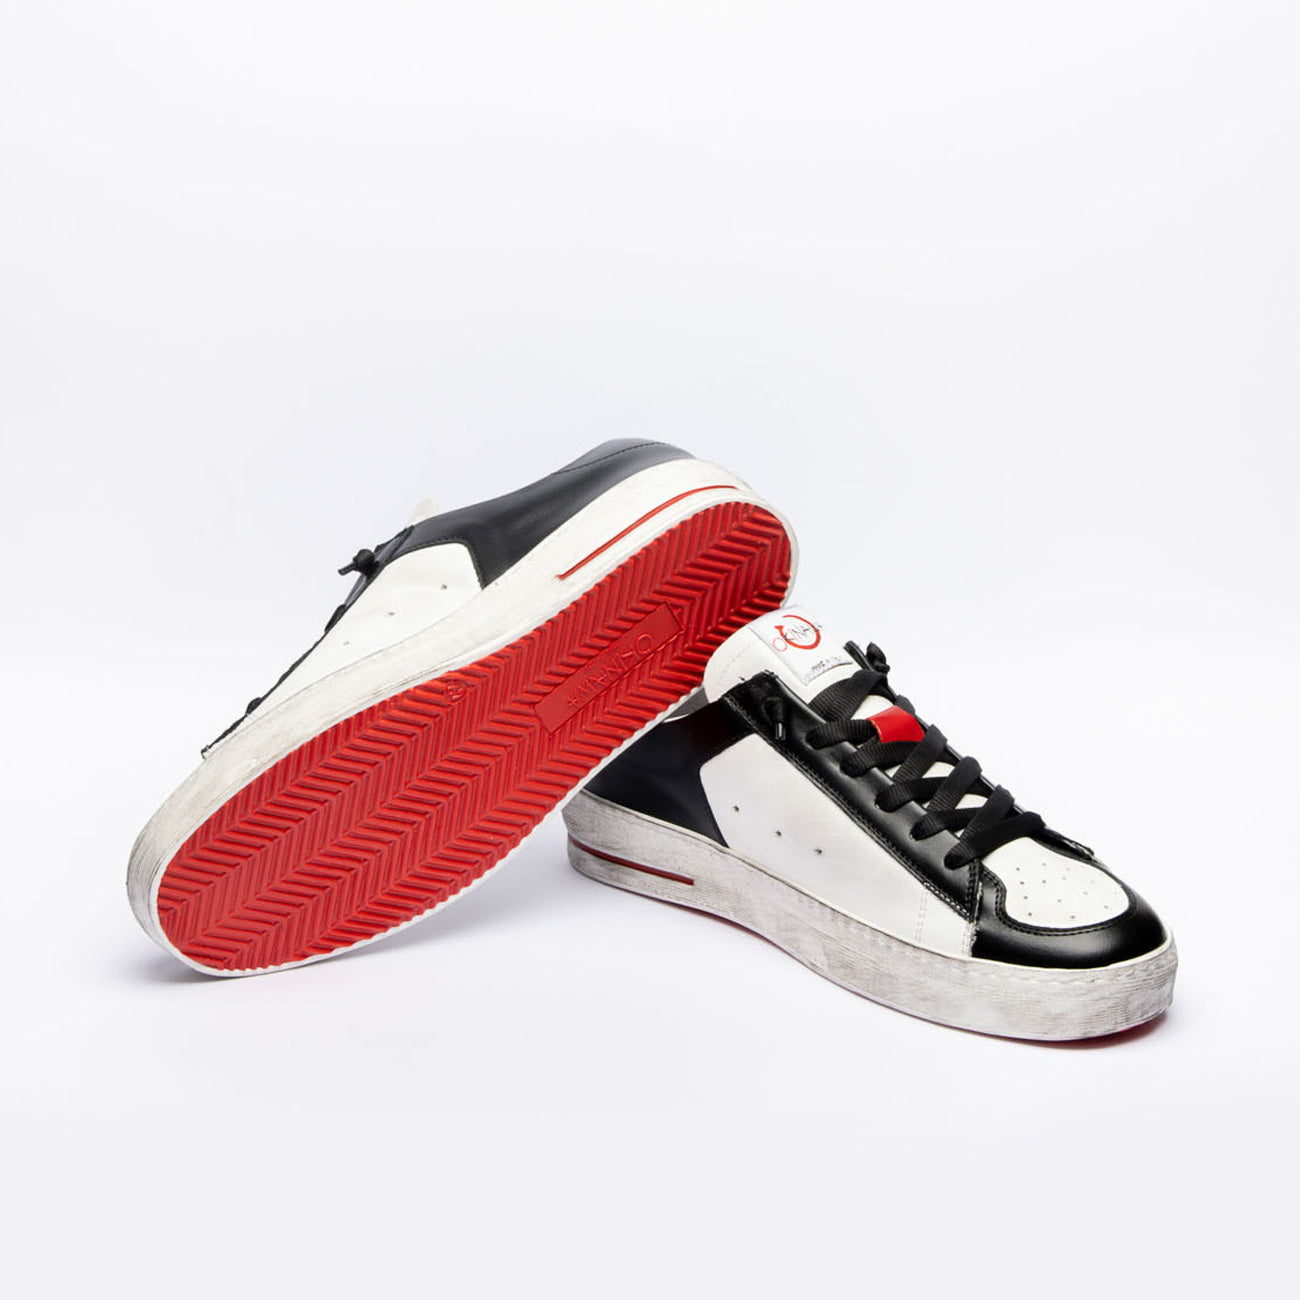 Sneaker Okinawa Basket 2444 in white and black leather